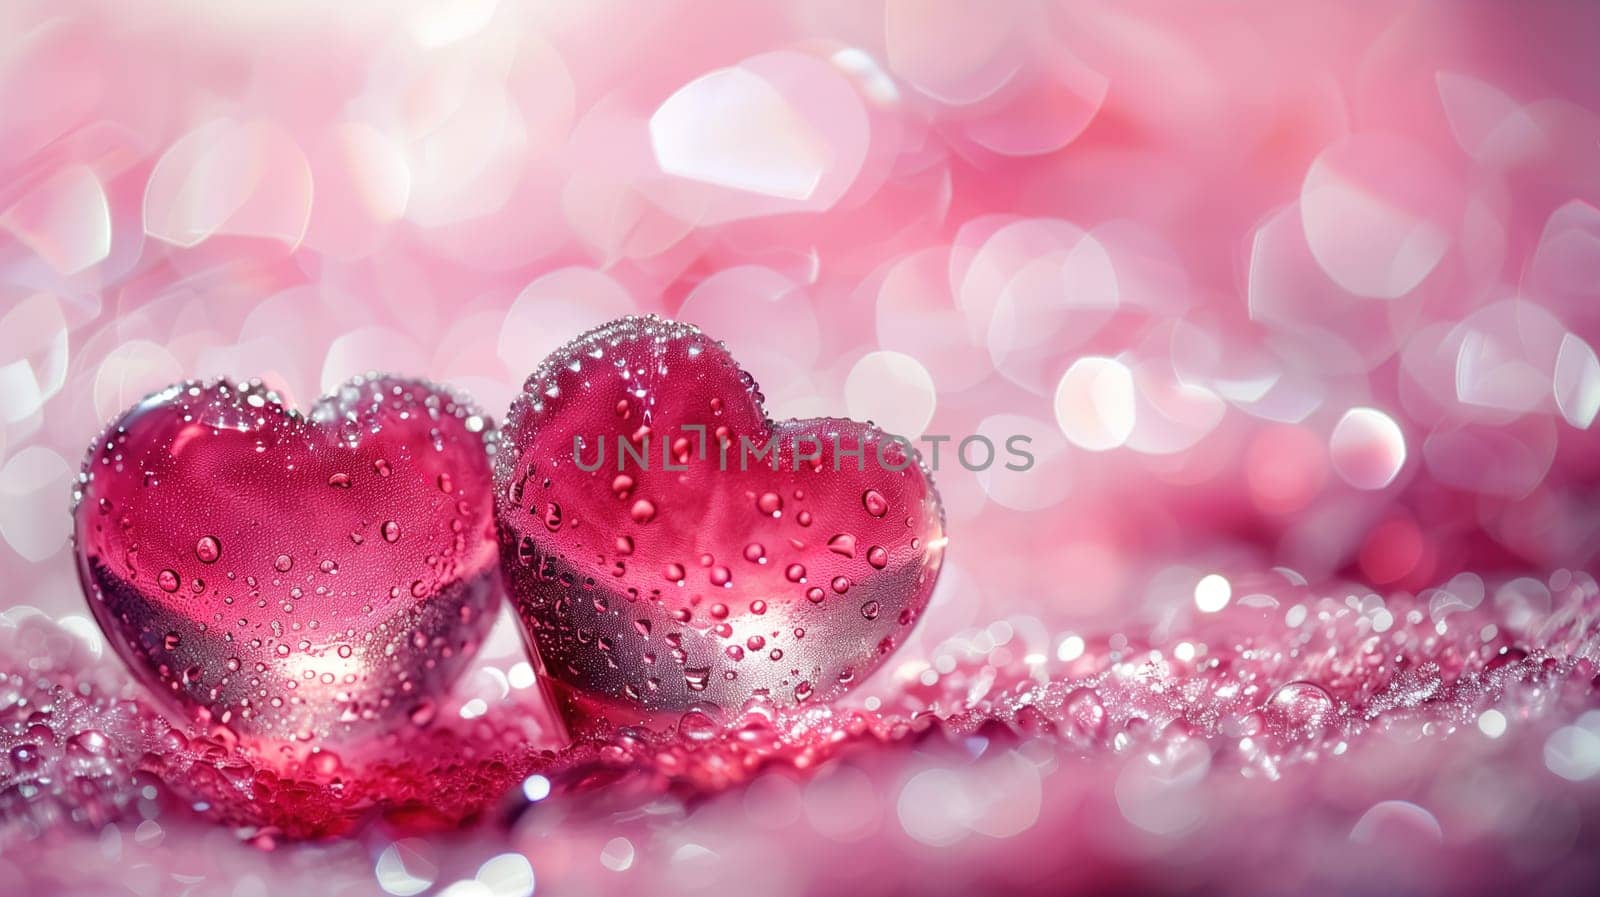 In honor of International Mothers Day, a stage is adorned with two sparkling red hearts covered in glistening water droplets, symbolizing love and appreciation. These vibrant decorations set the scene for a concert dedicated to mothers around the world, creating an atmosphere of affection and gratitude.